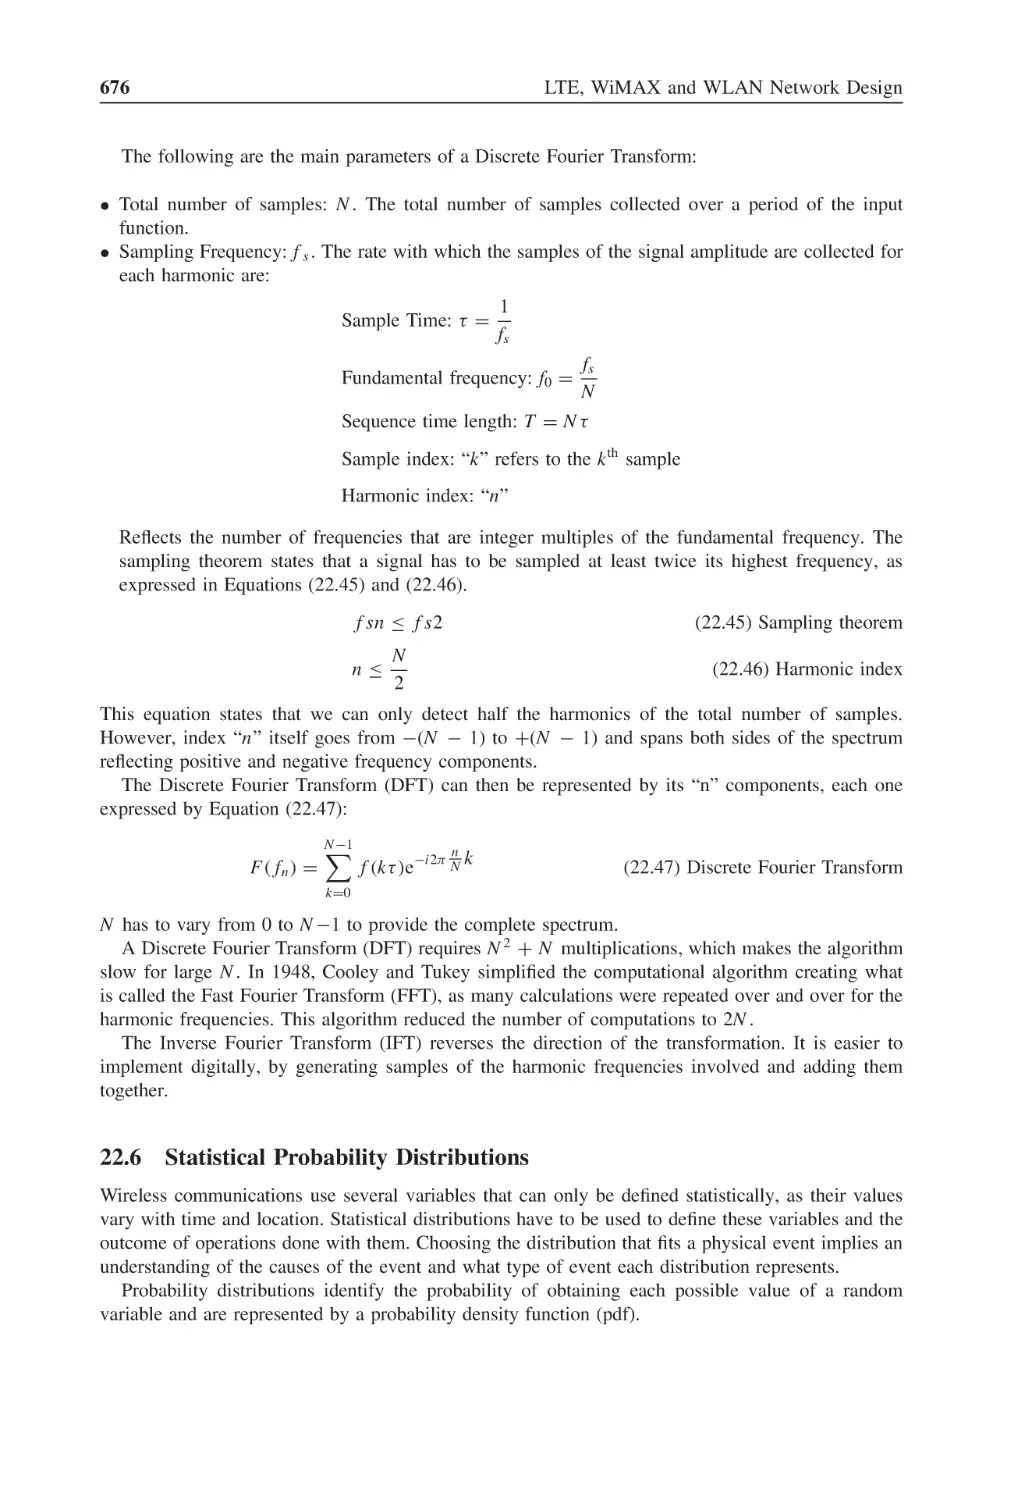 22.6 Statistical Probability Distributions